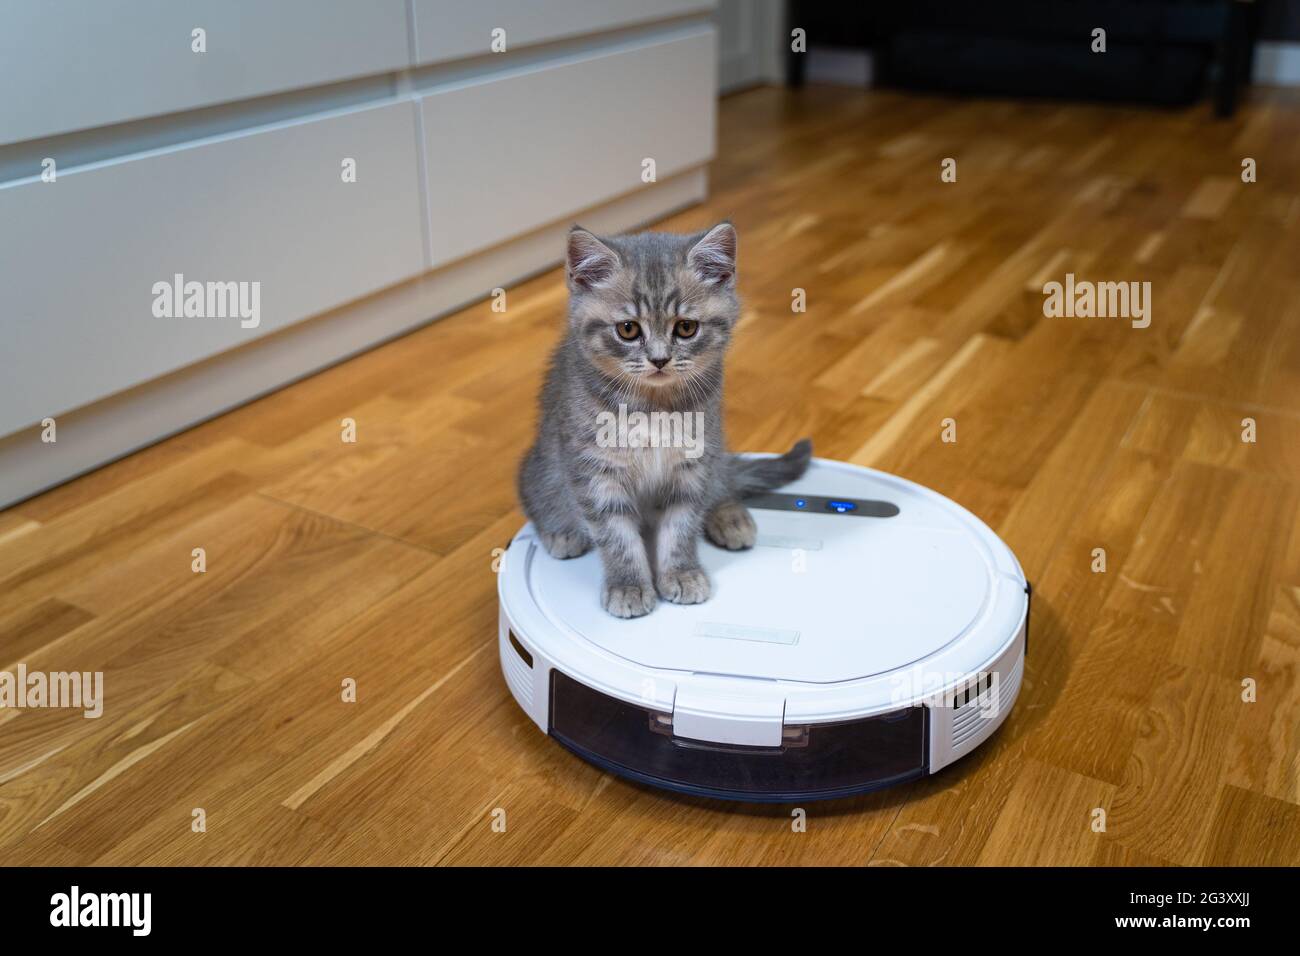 Automatic equipment helping in household. Funny kitten of Scottish Straight breed of gray color with stripes plays at home while Stock Photo